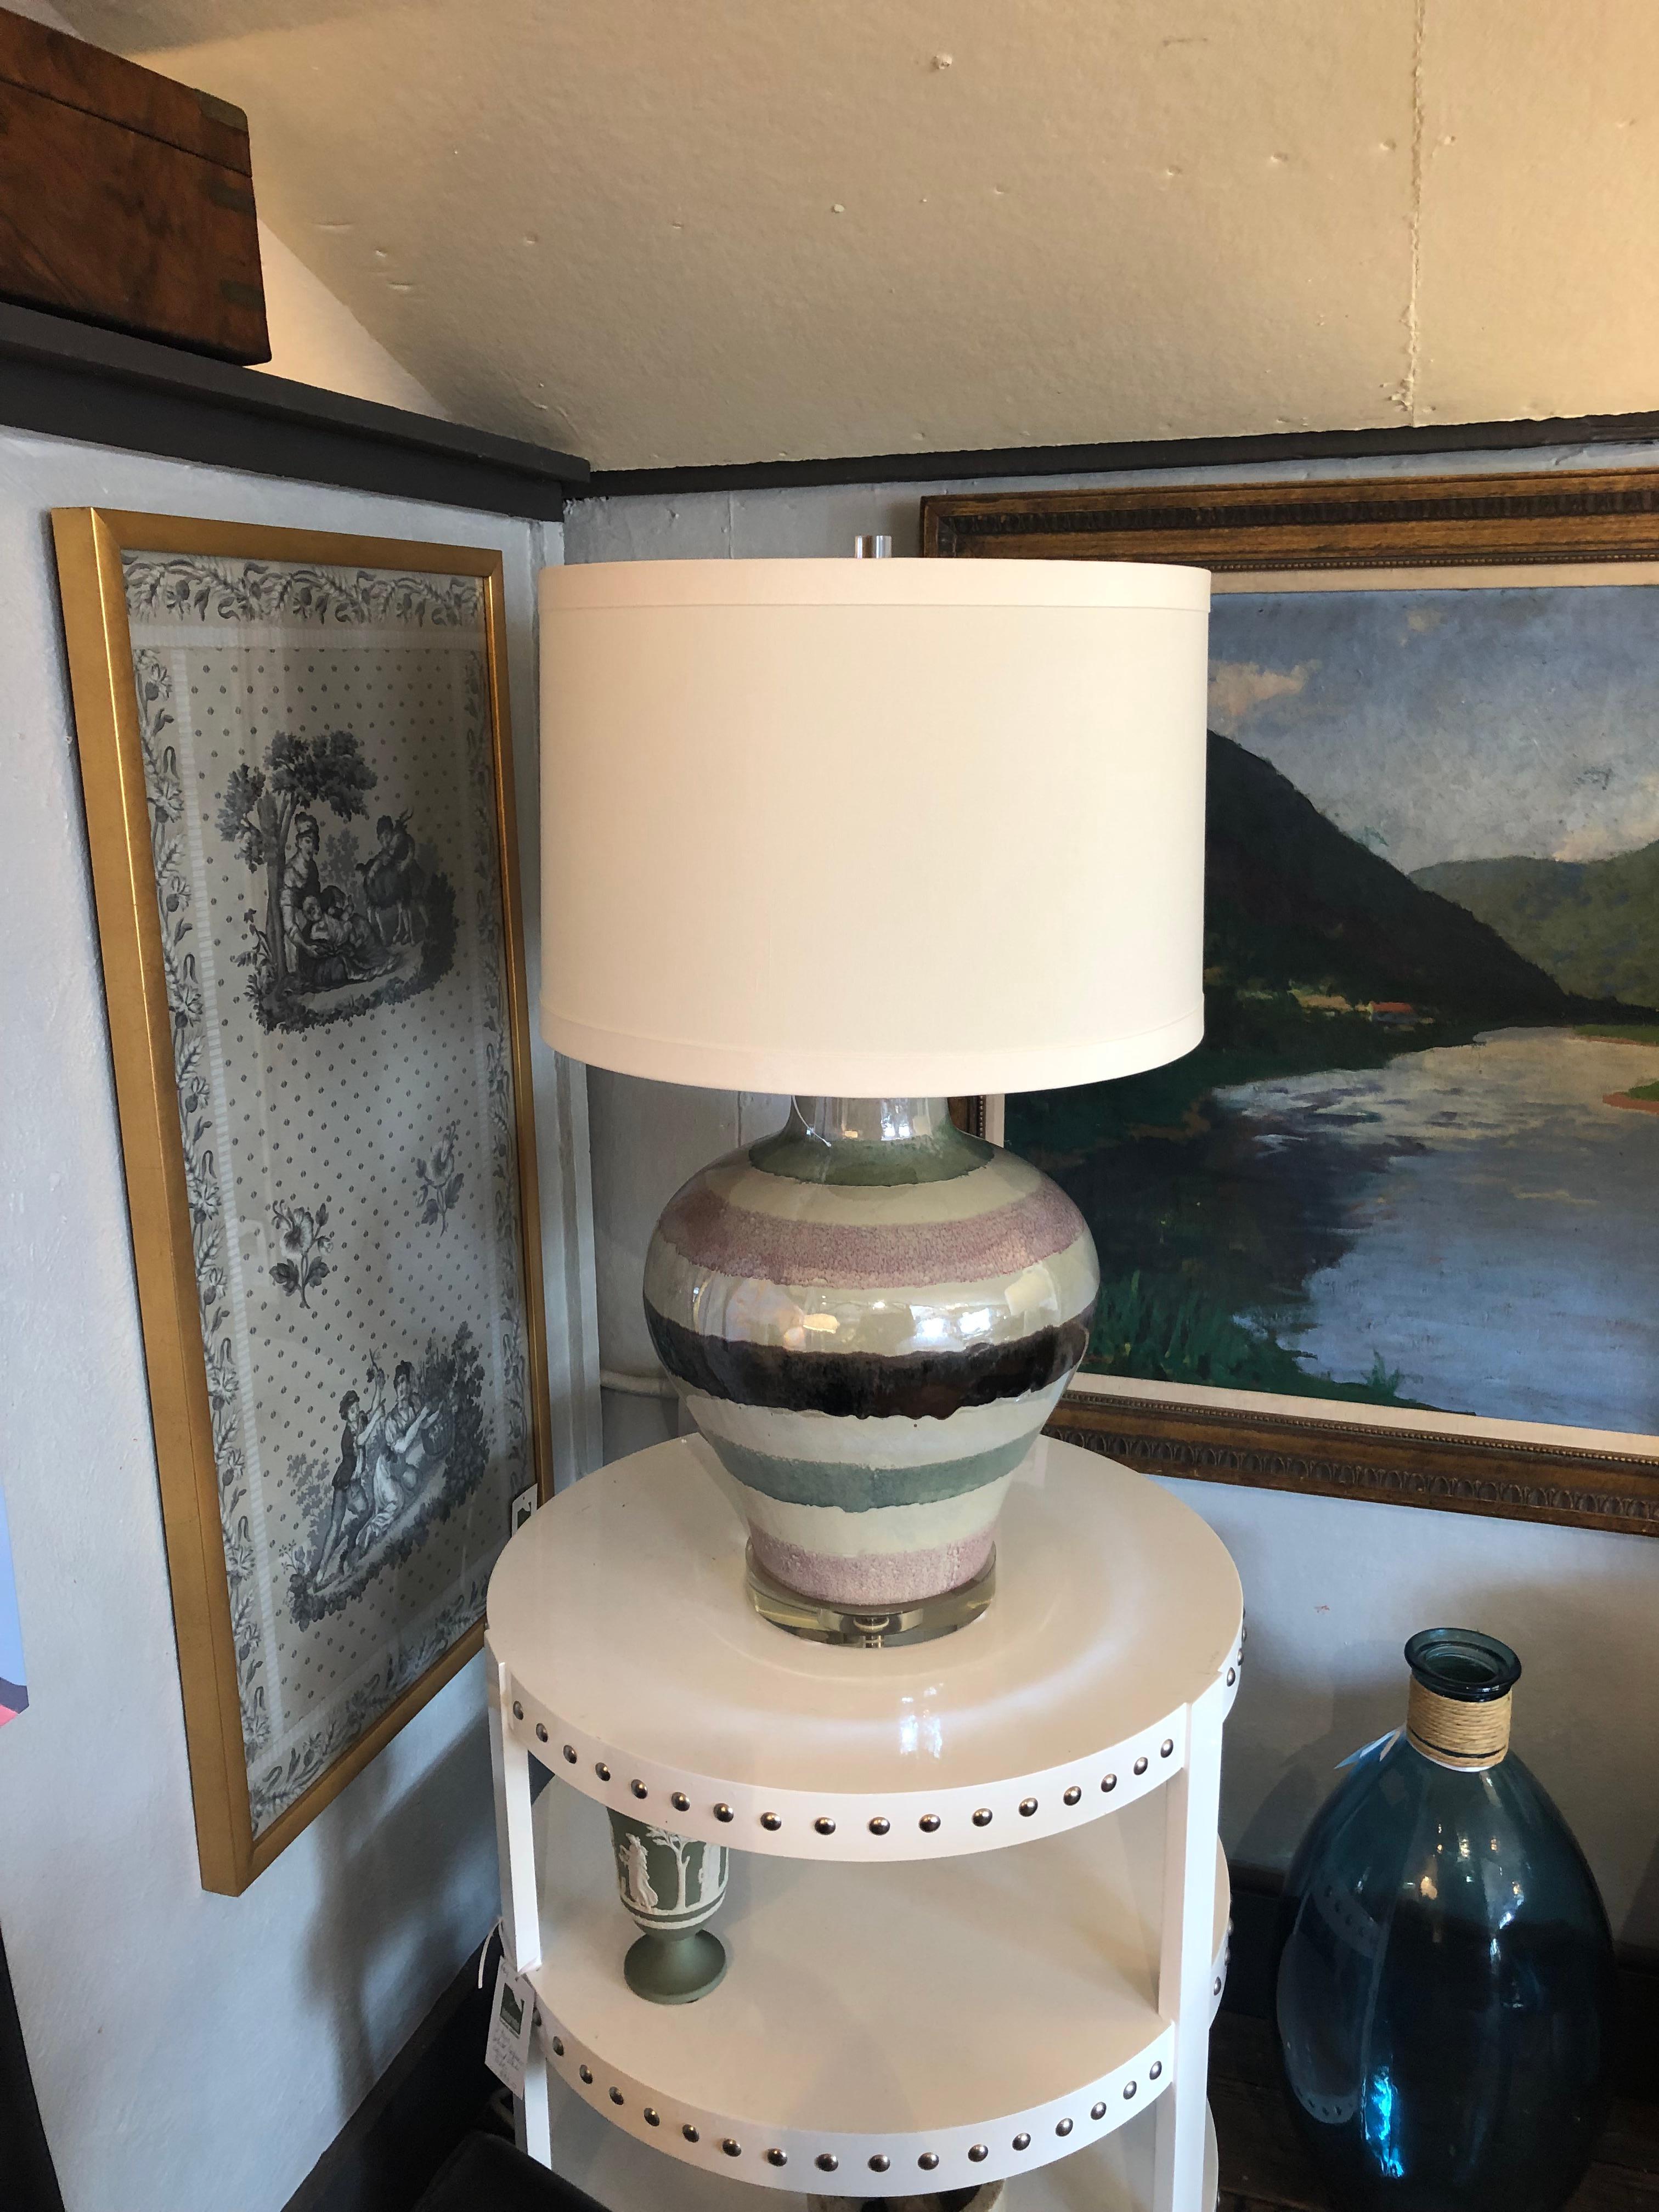 Stunning very large hand made artisan table lamp having glossy luscious glaze in horizontal stripes of taupe, celadon, mauve and brown.
32” H to lucite finial 15” diameter 
New $200 custom shade 